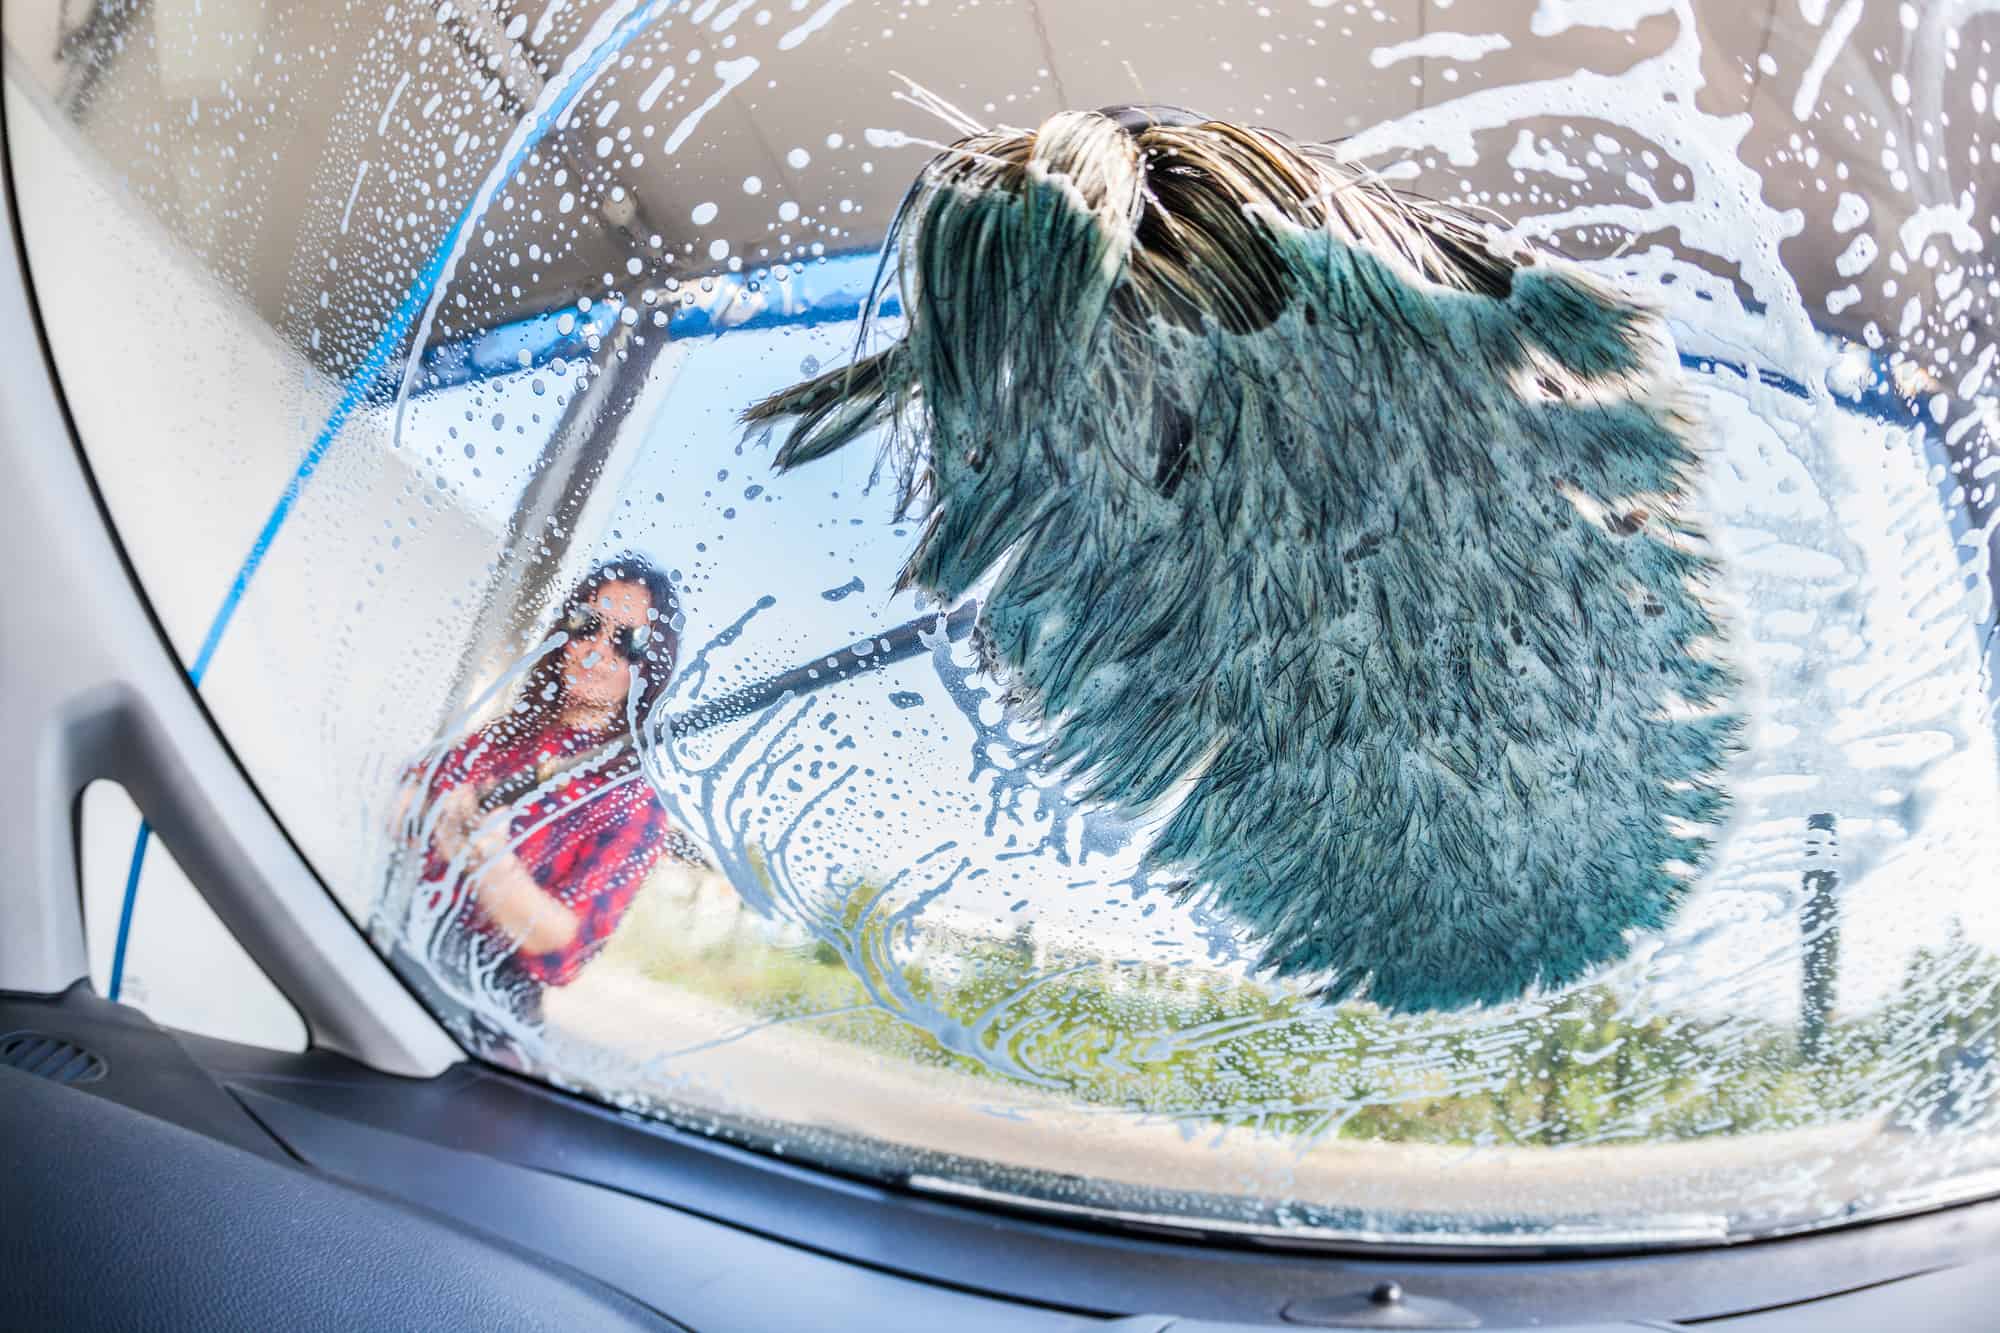 How To Clean The Inside Of Your Car Windshield - The Motor Guy